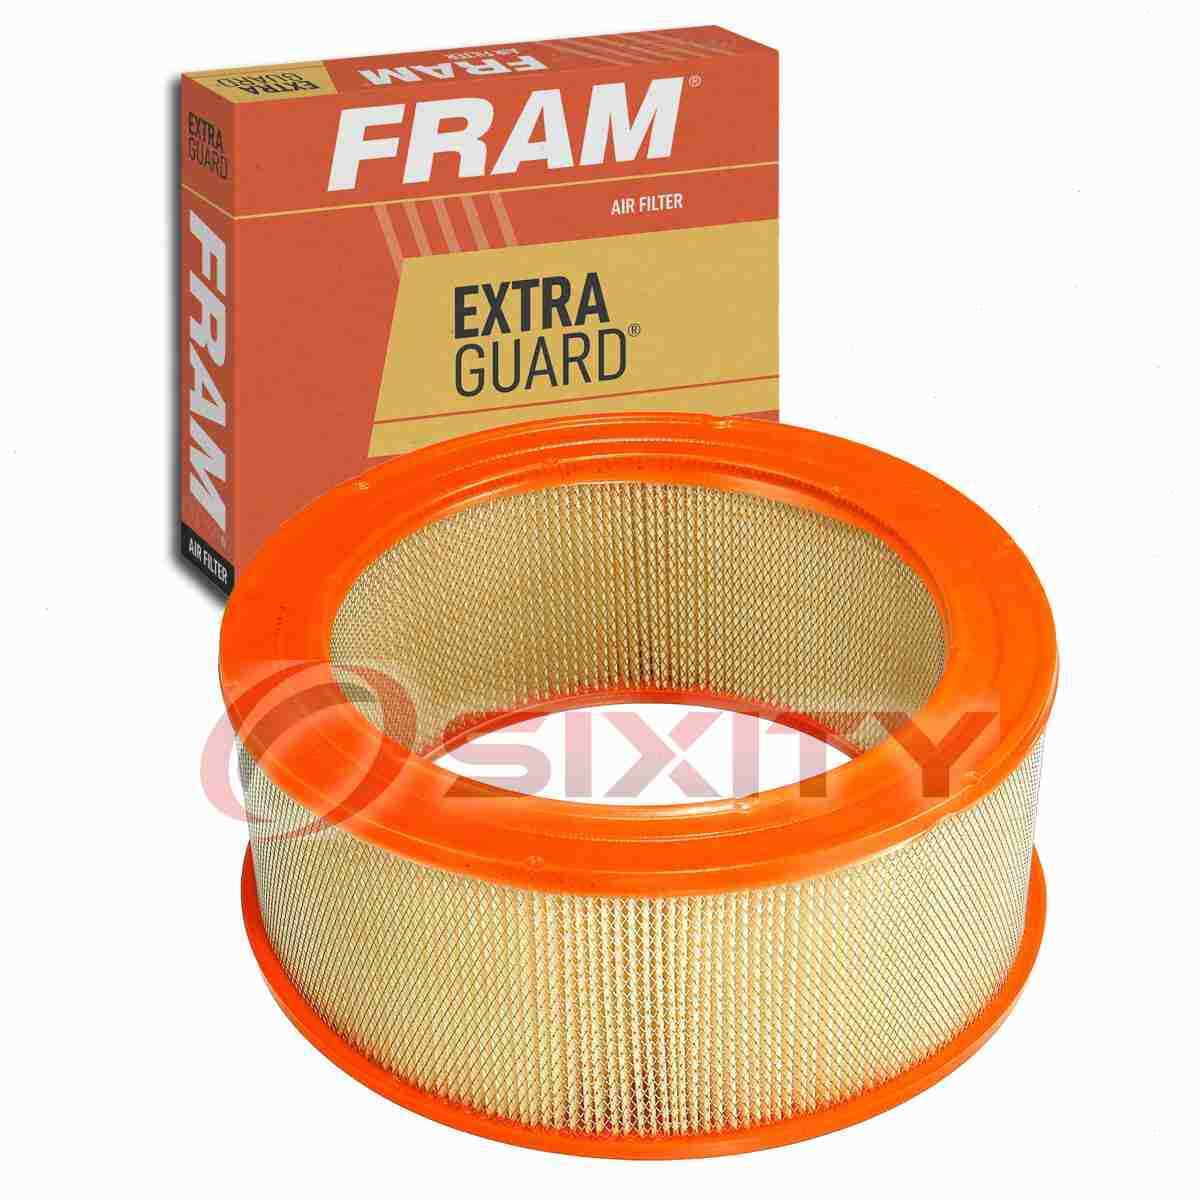 FRAM Extra Guard Air Filter for 1956-1963 Ford F-100 Intake Inlet Manifold jb